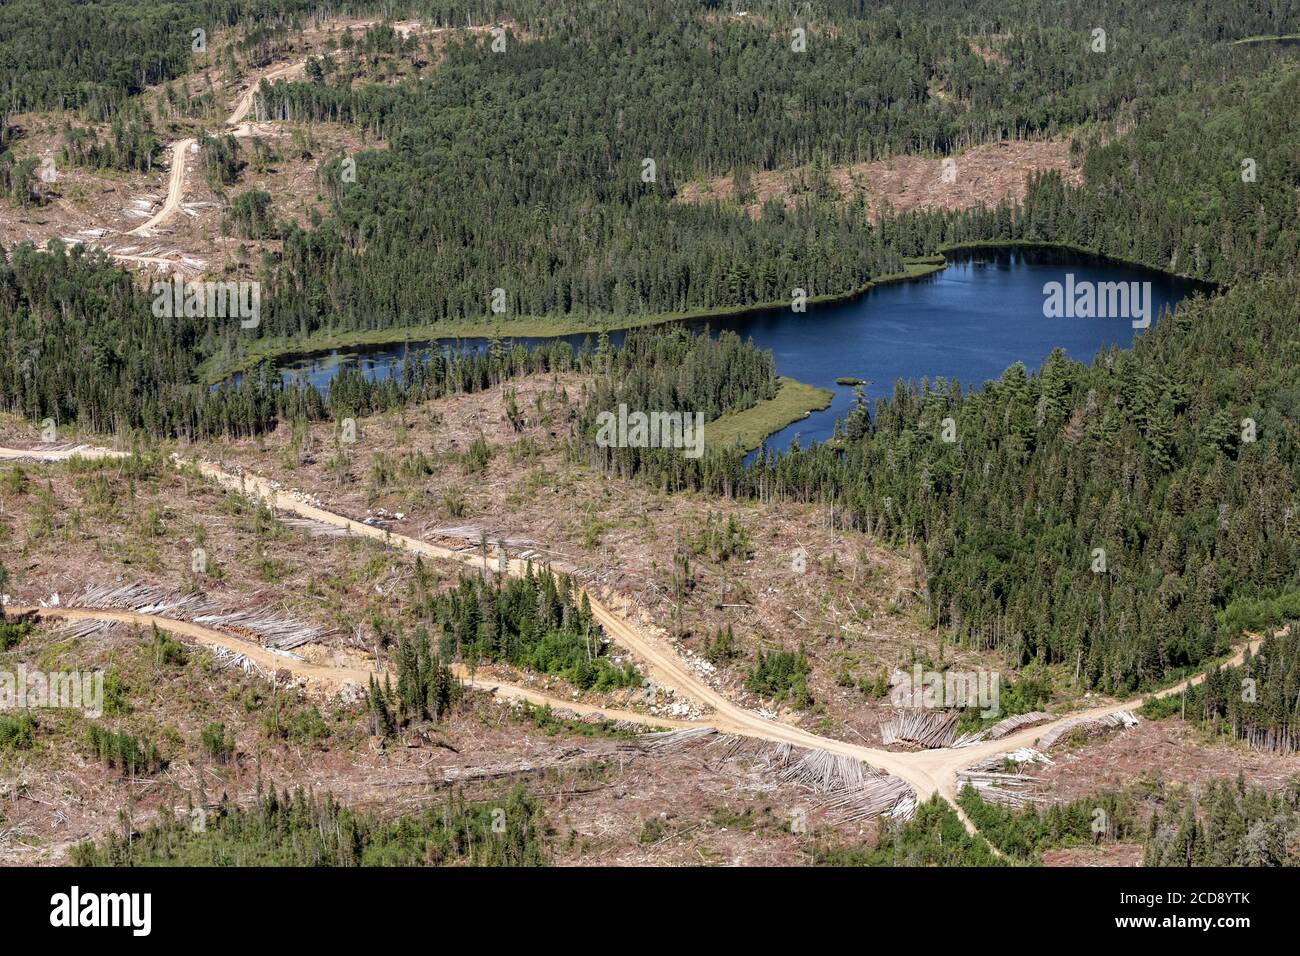 Canada, Province of Quebec, Mauricie Region, Saint-Maurice Wildlife Sanctuary north of Mauricie National Park, image of silviculture and deforestation Stock Photo